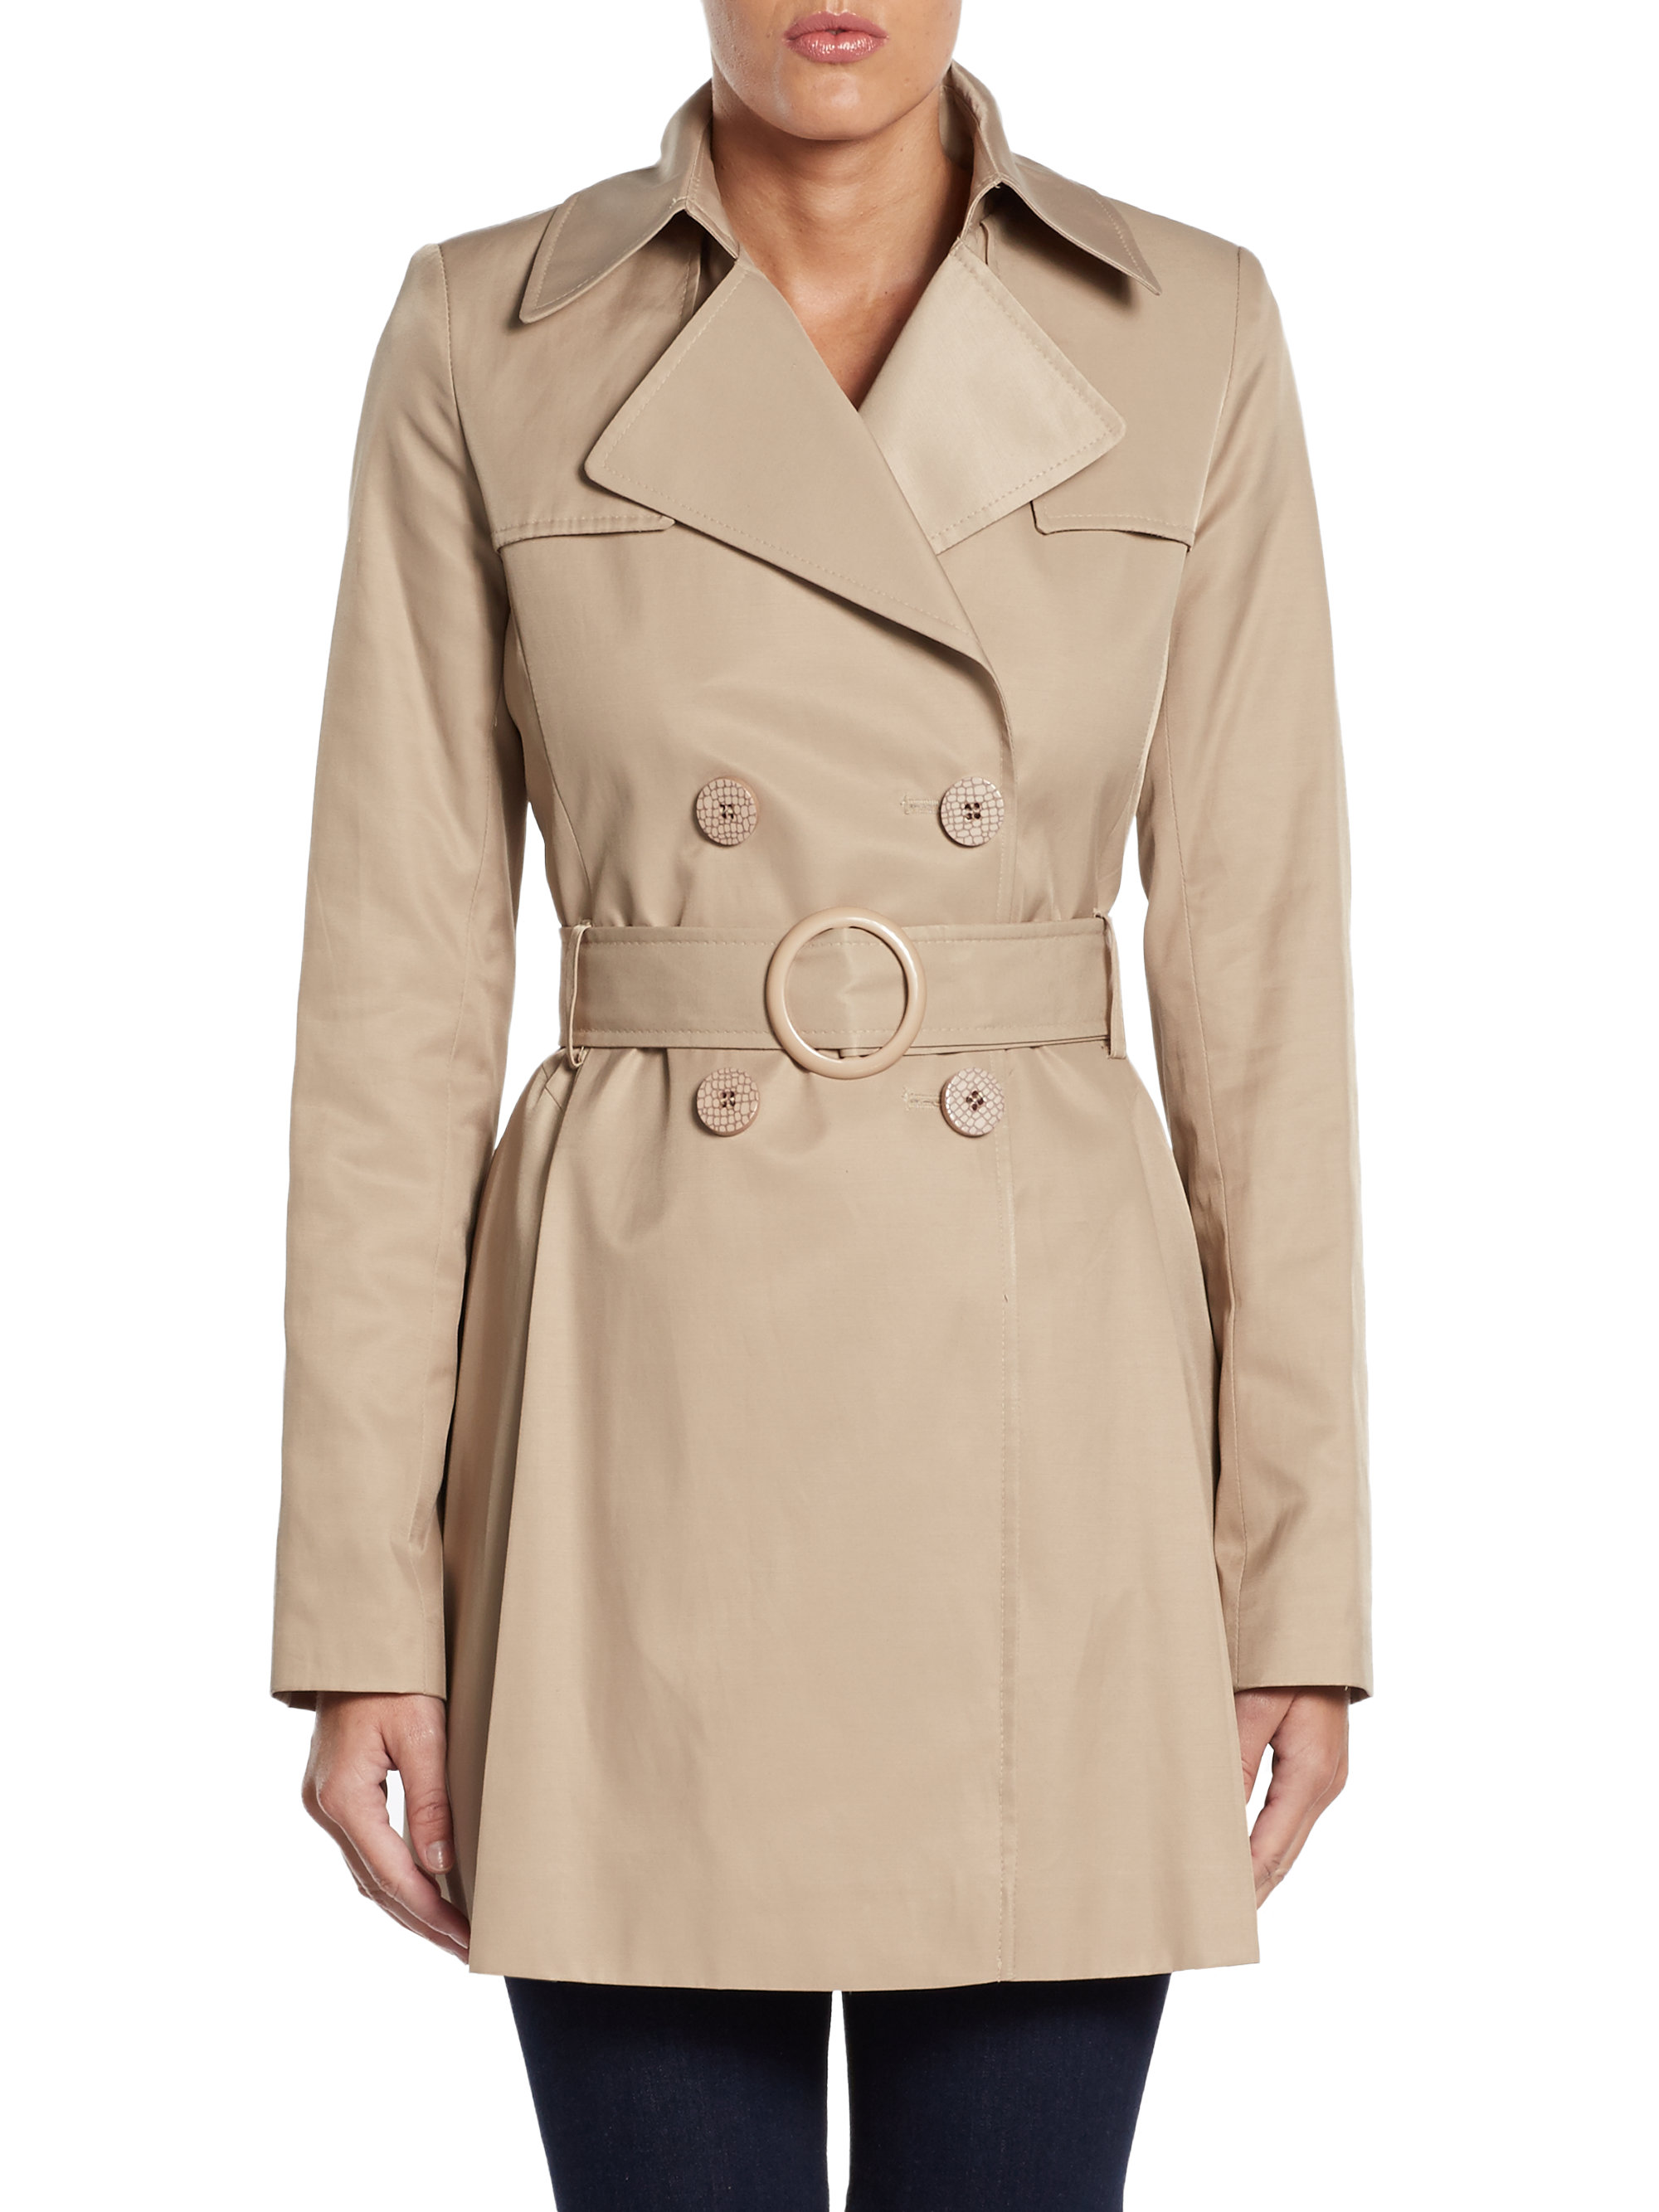 Via Spiga Pleated Back Trench Coat in Beige (SAND) | Lyst